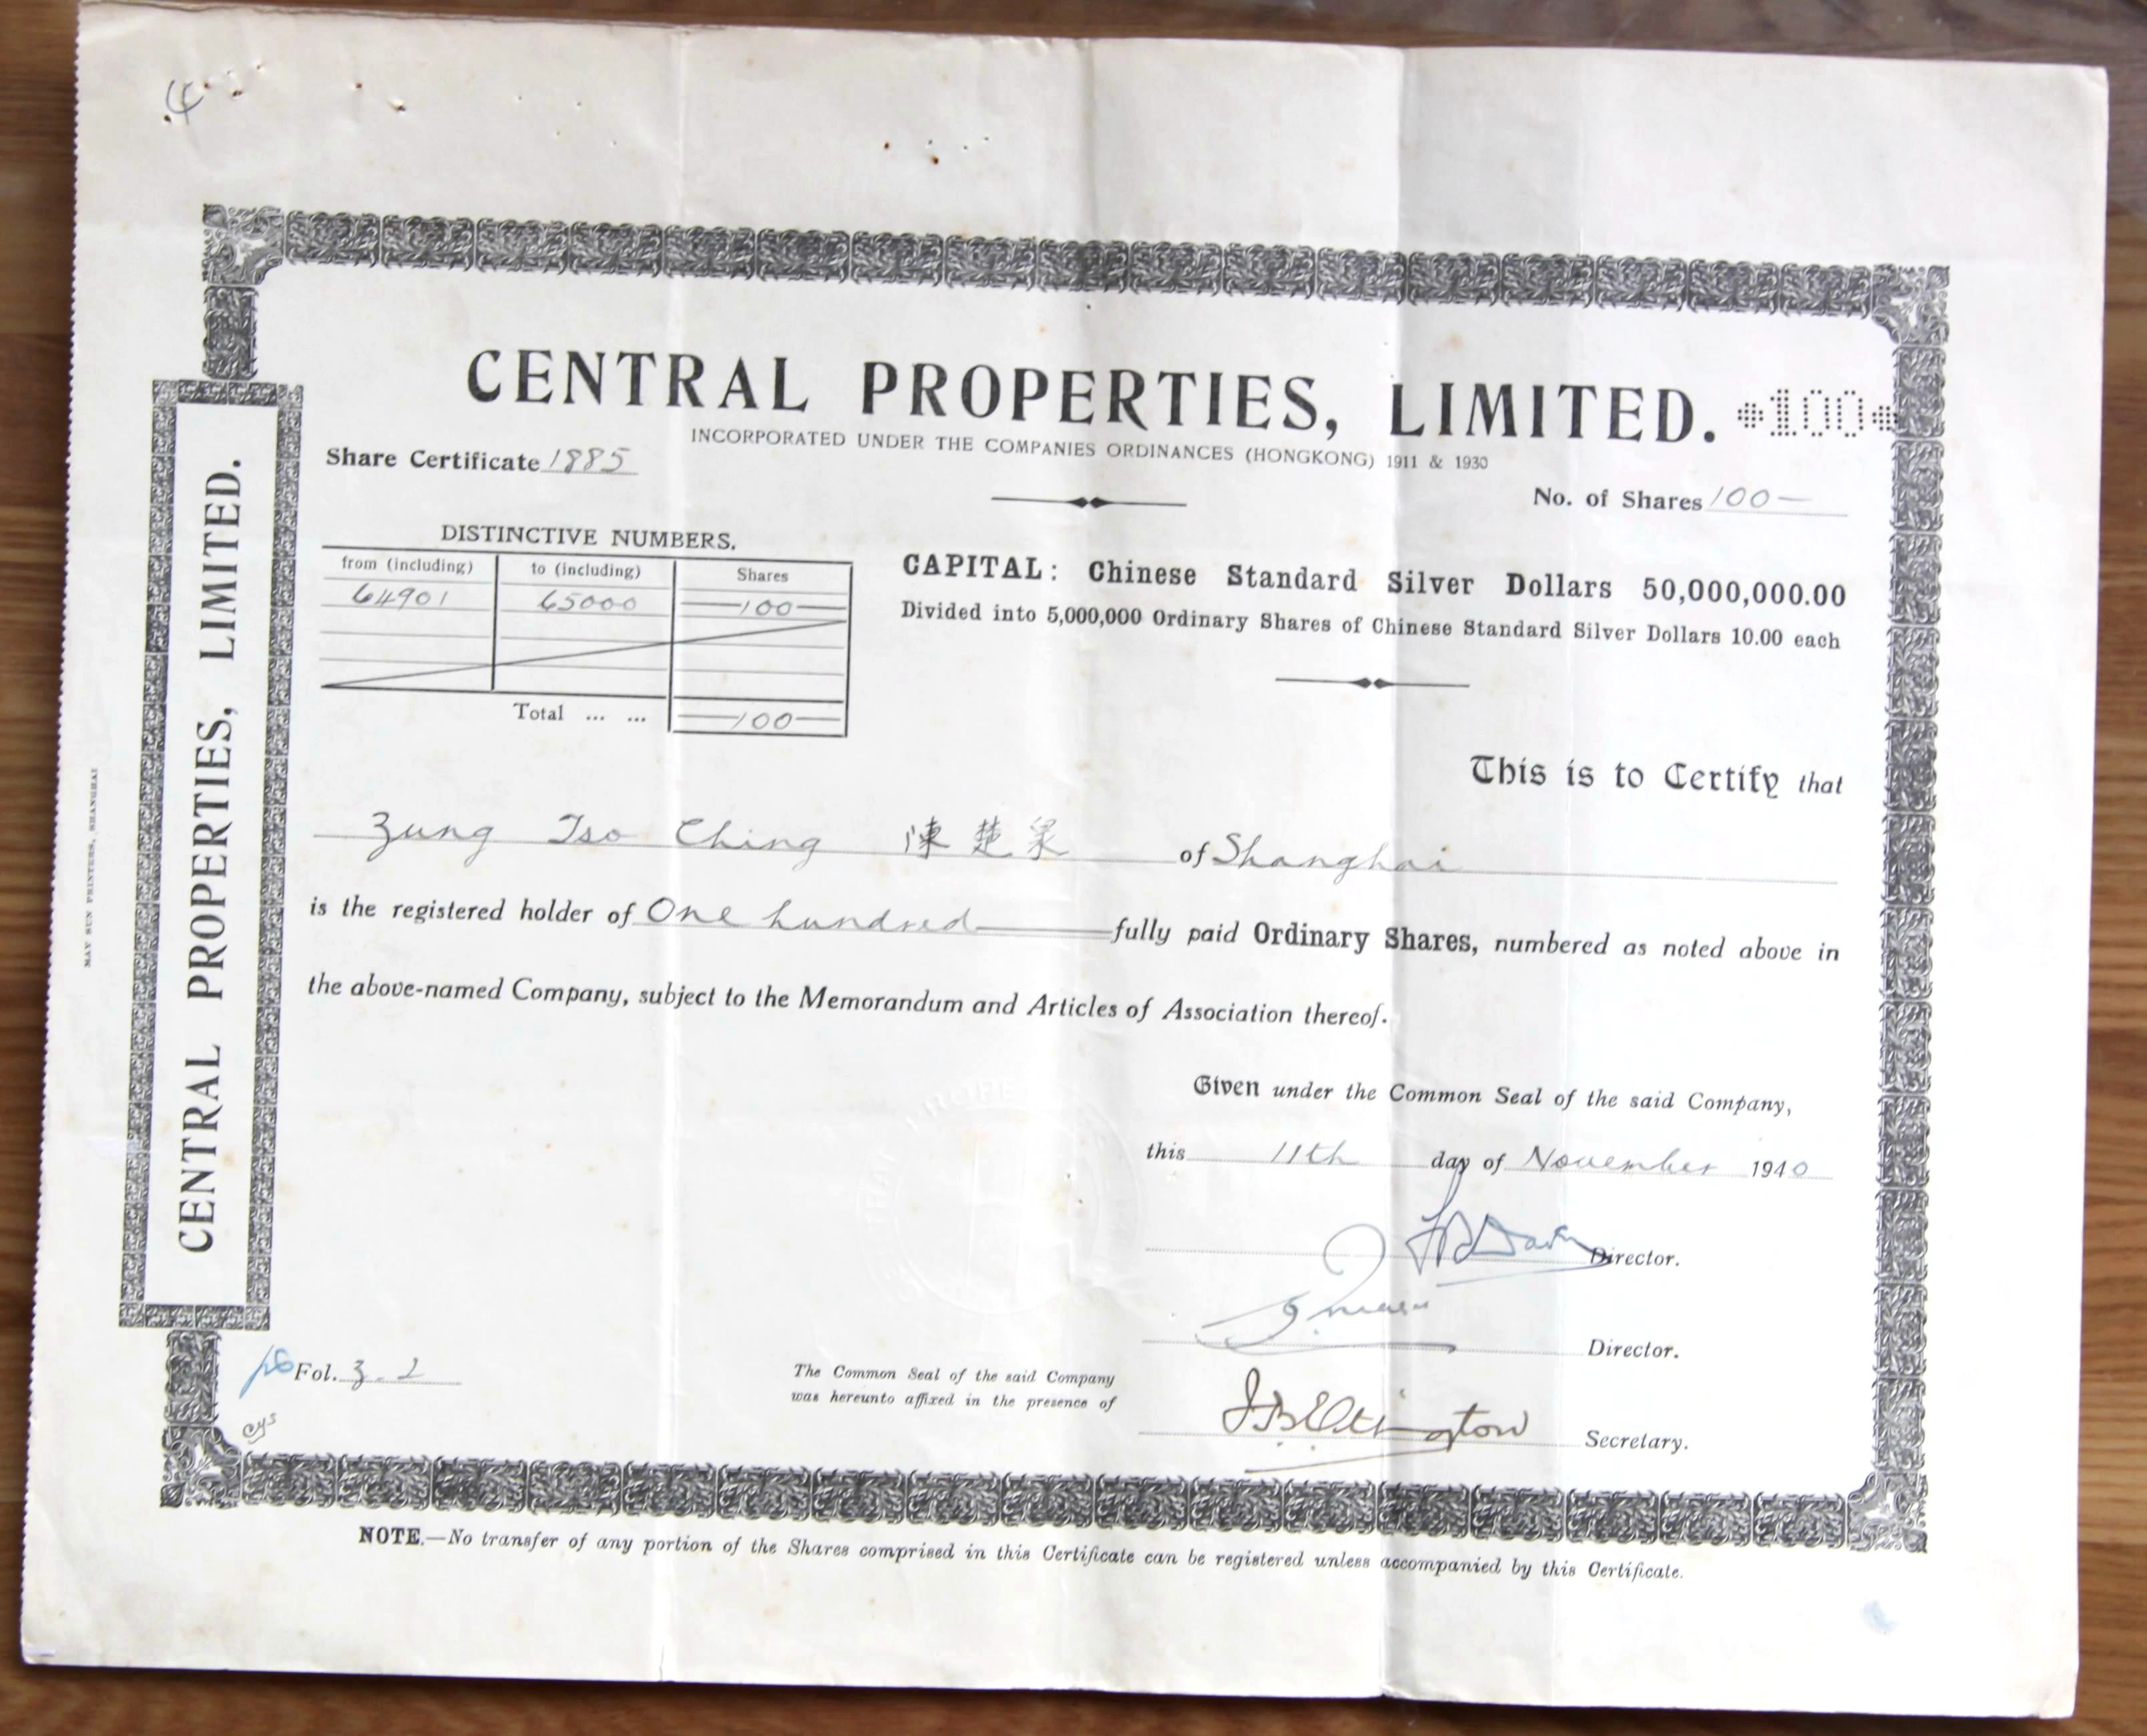 S4049, Central Properties Ltd, Stock Certificate of 100 Shares, Shanghai 1940 - Click Image to Close